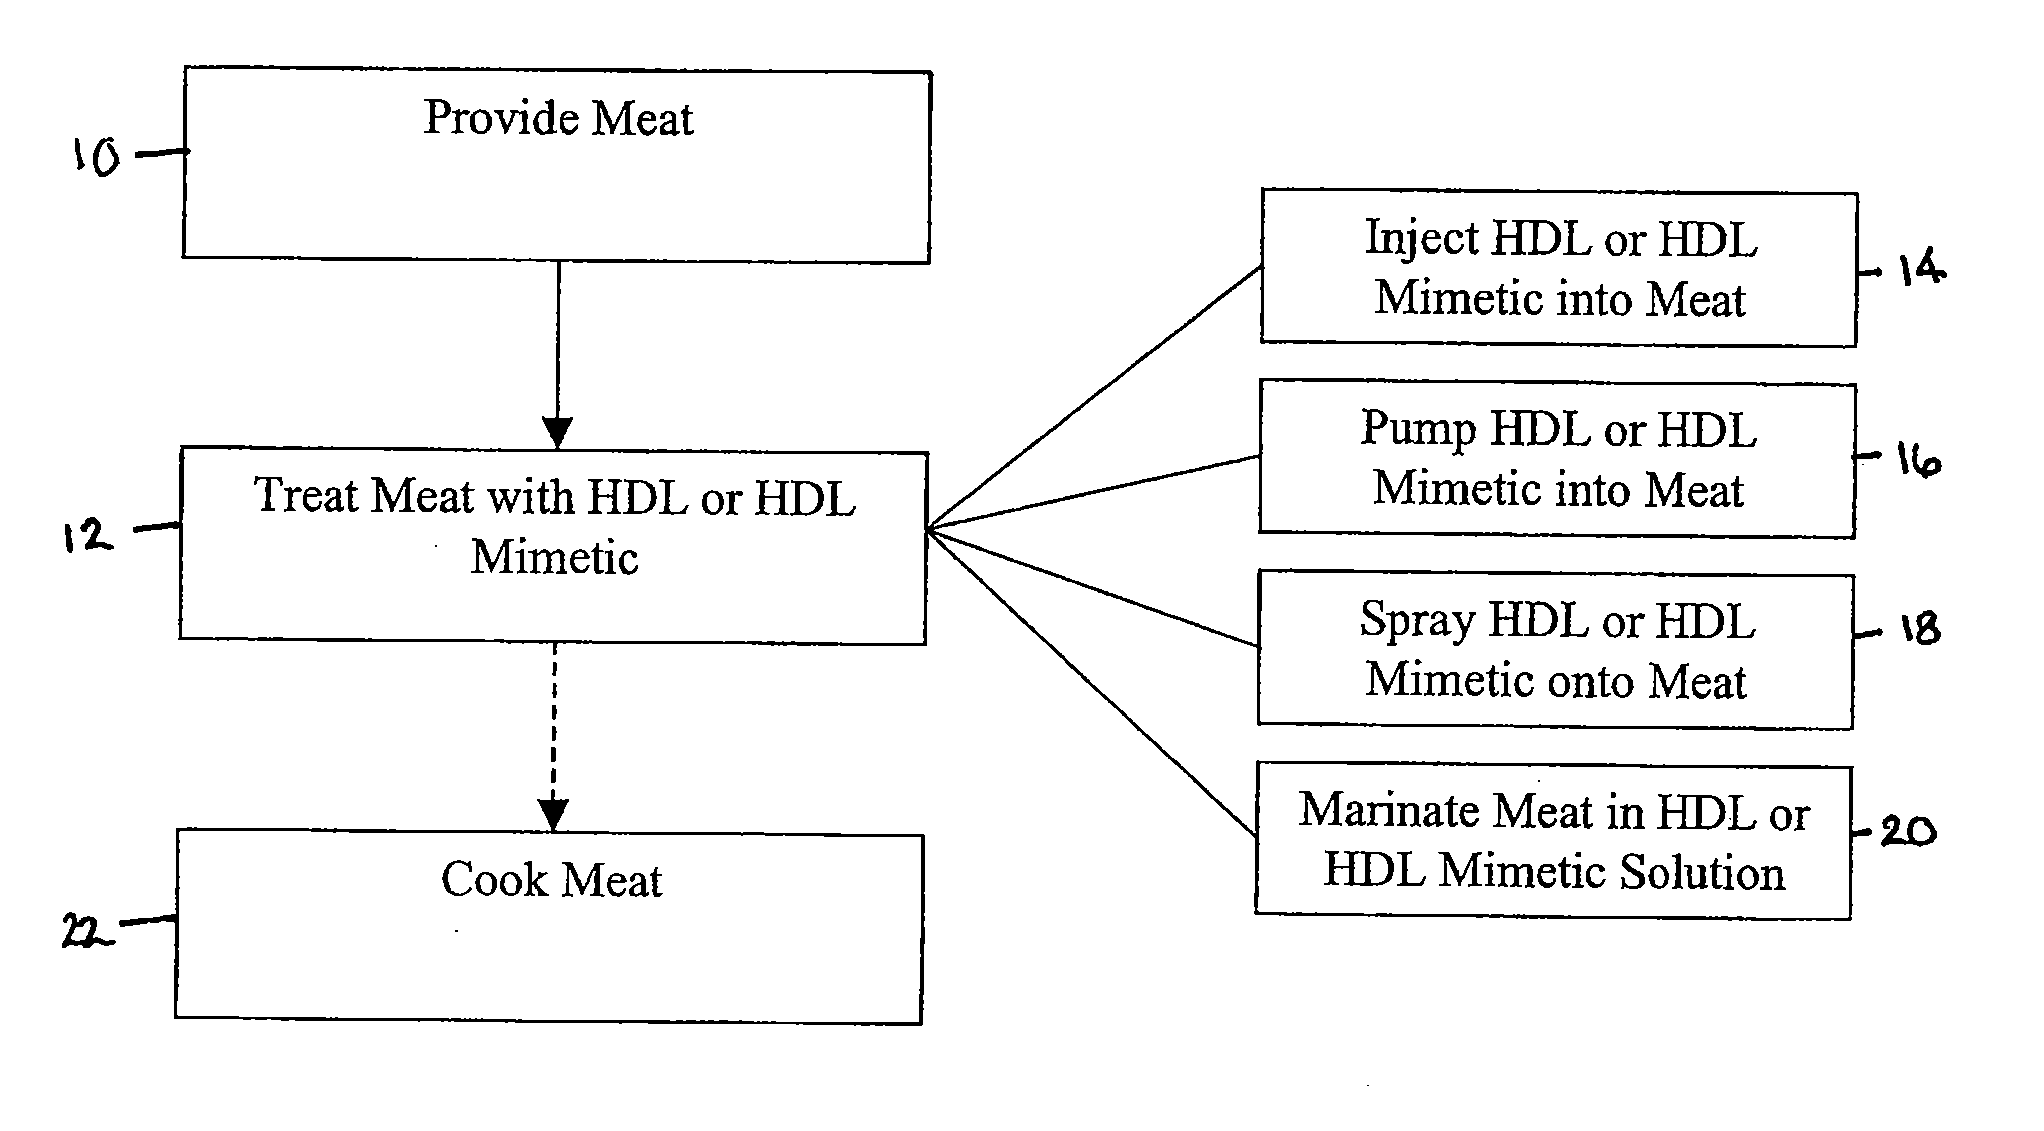 Meat Having Increased Level of HDL